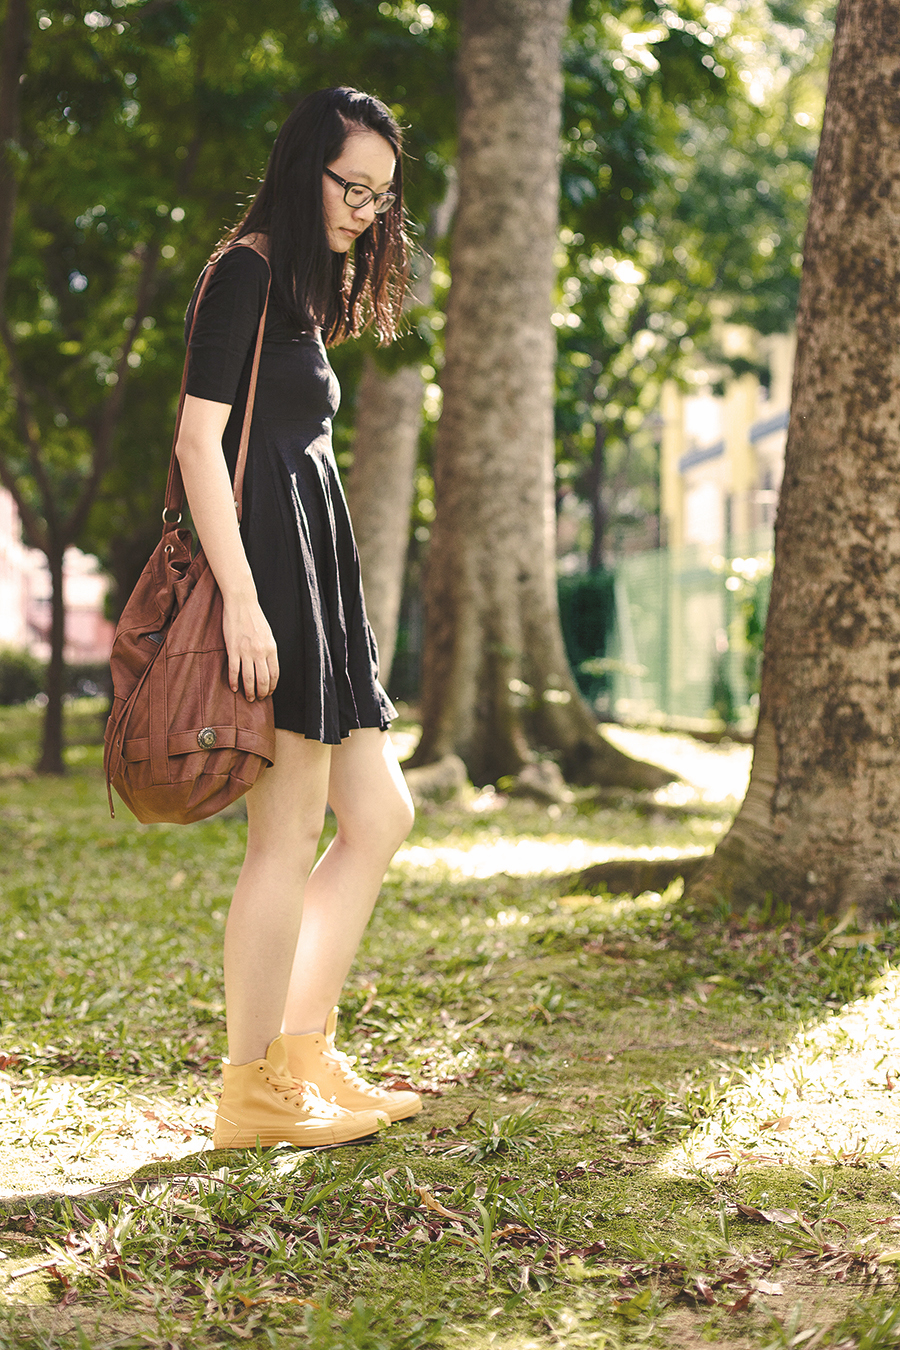 Summer outfit details: Forever 21 little black scoop back dress, Gentle Fawn brown leather sling bag, Converse All star Chuck Taylor yellow Rubber Coated Sneakers, Gap black frame glasses.